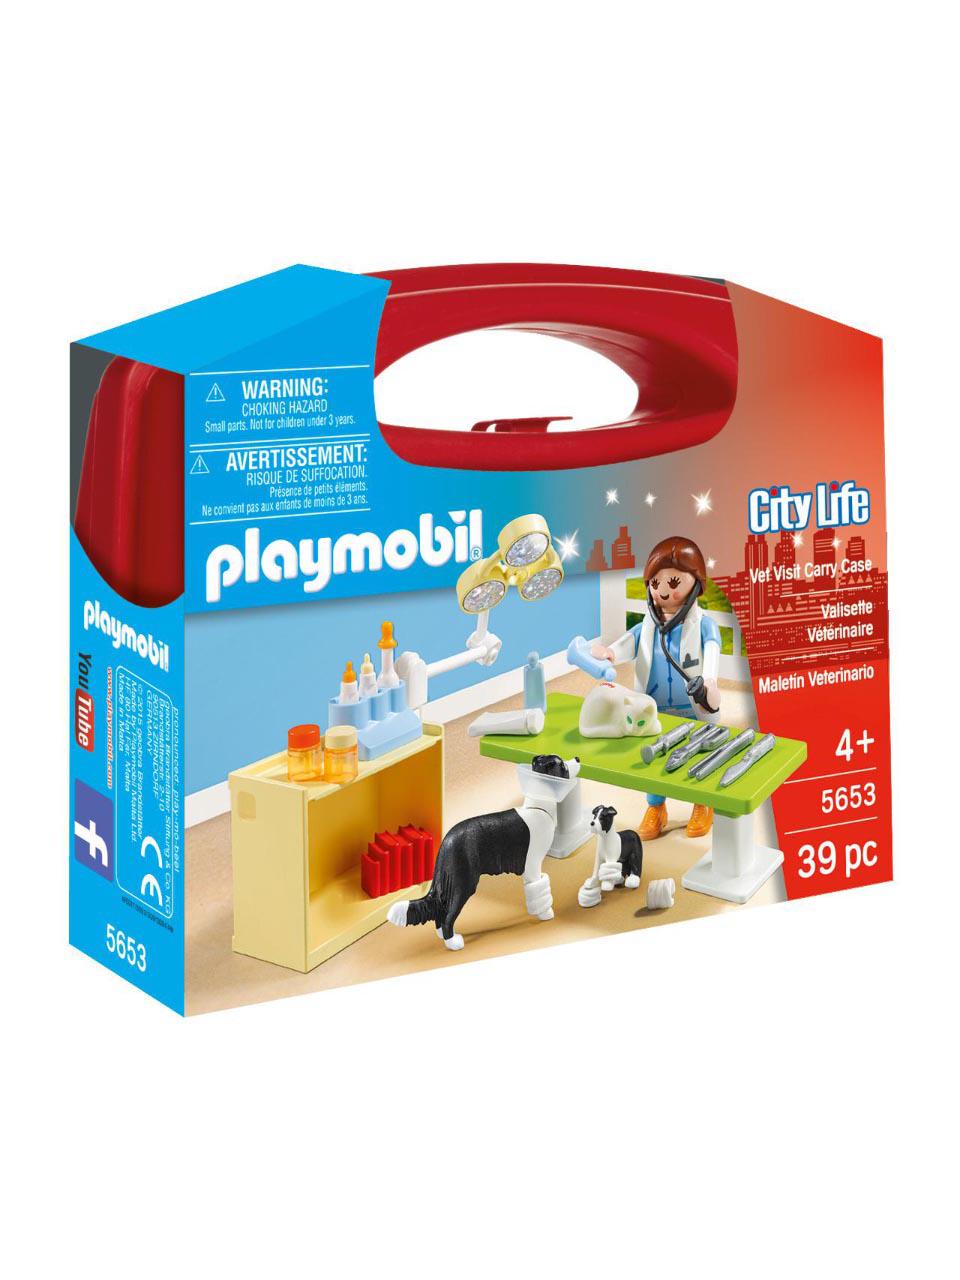 Playmobil City Life Veterinary Takeaway Clinic 5870 Transportable